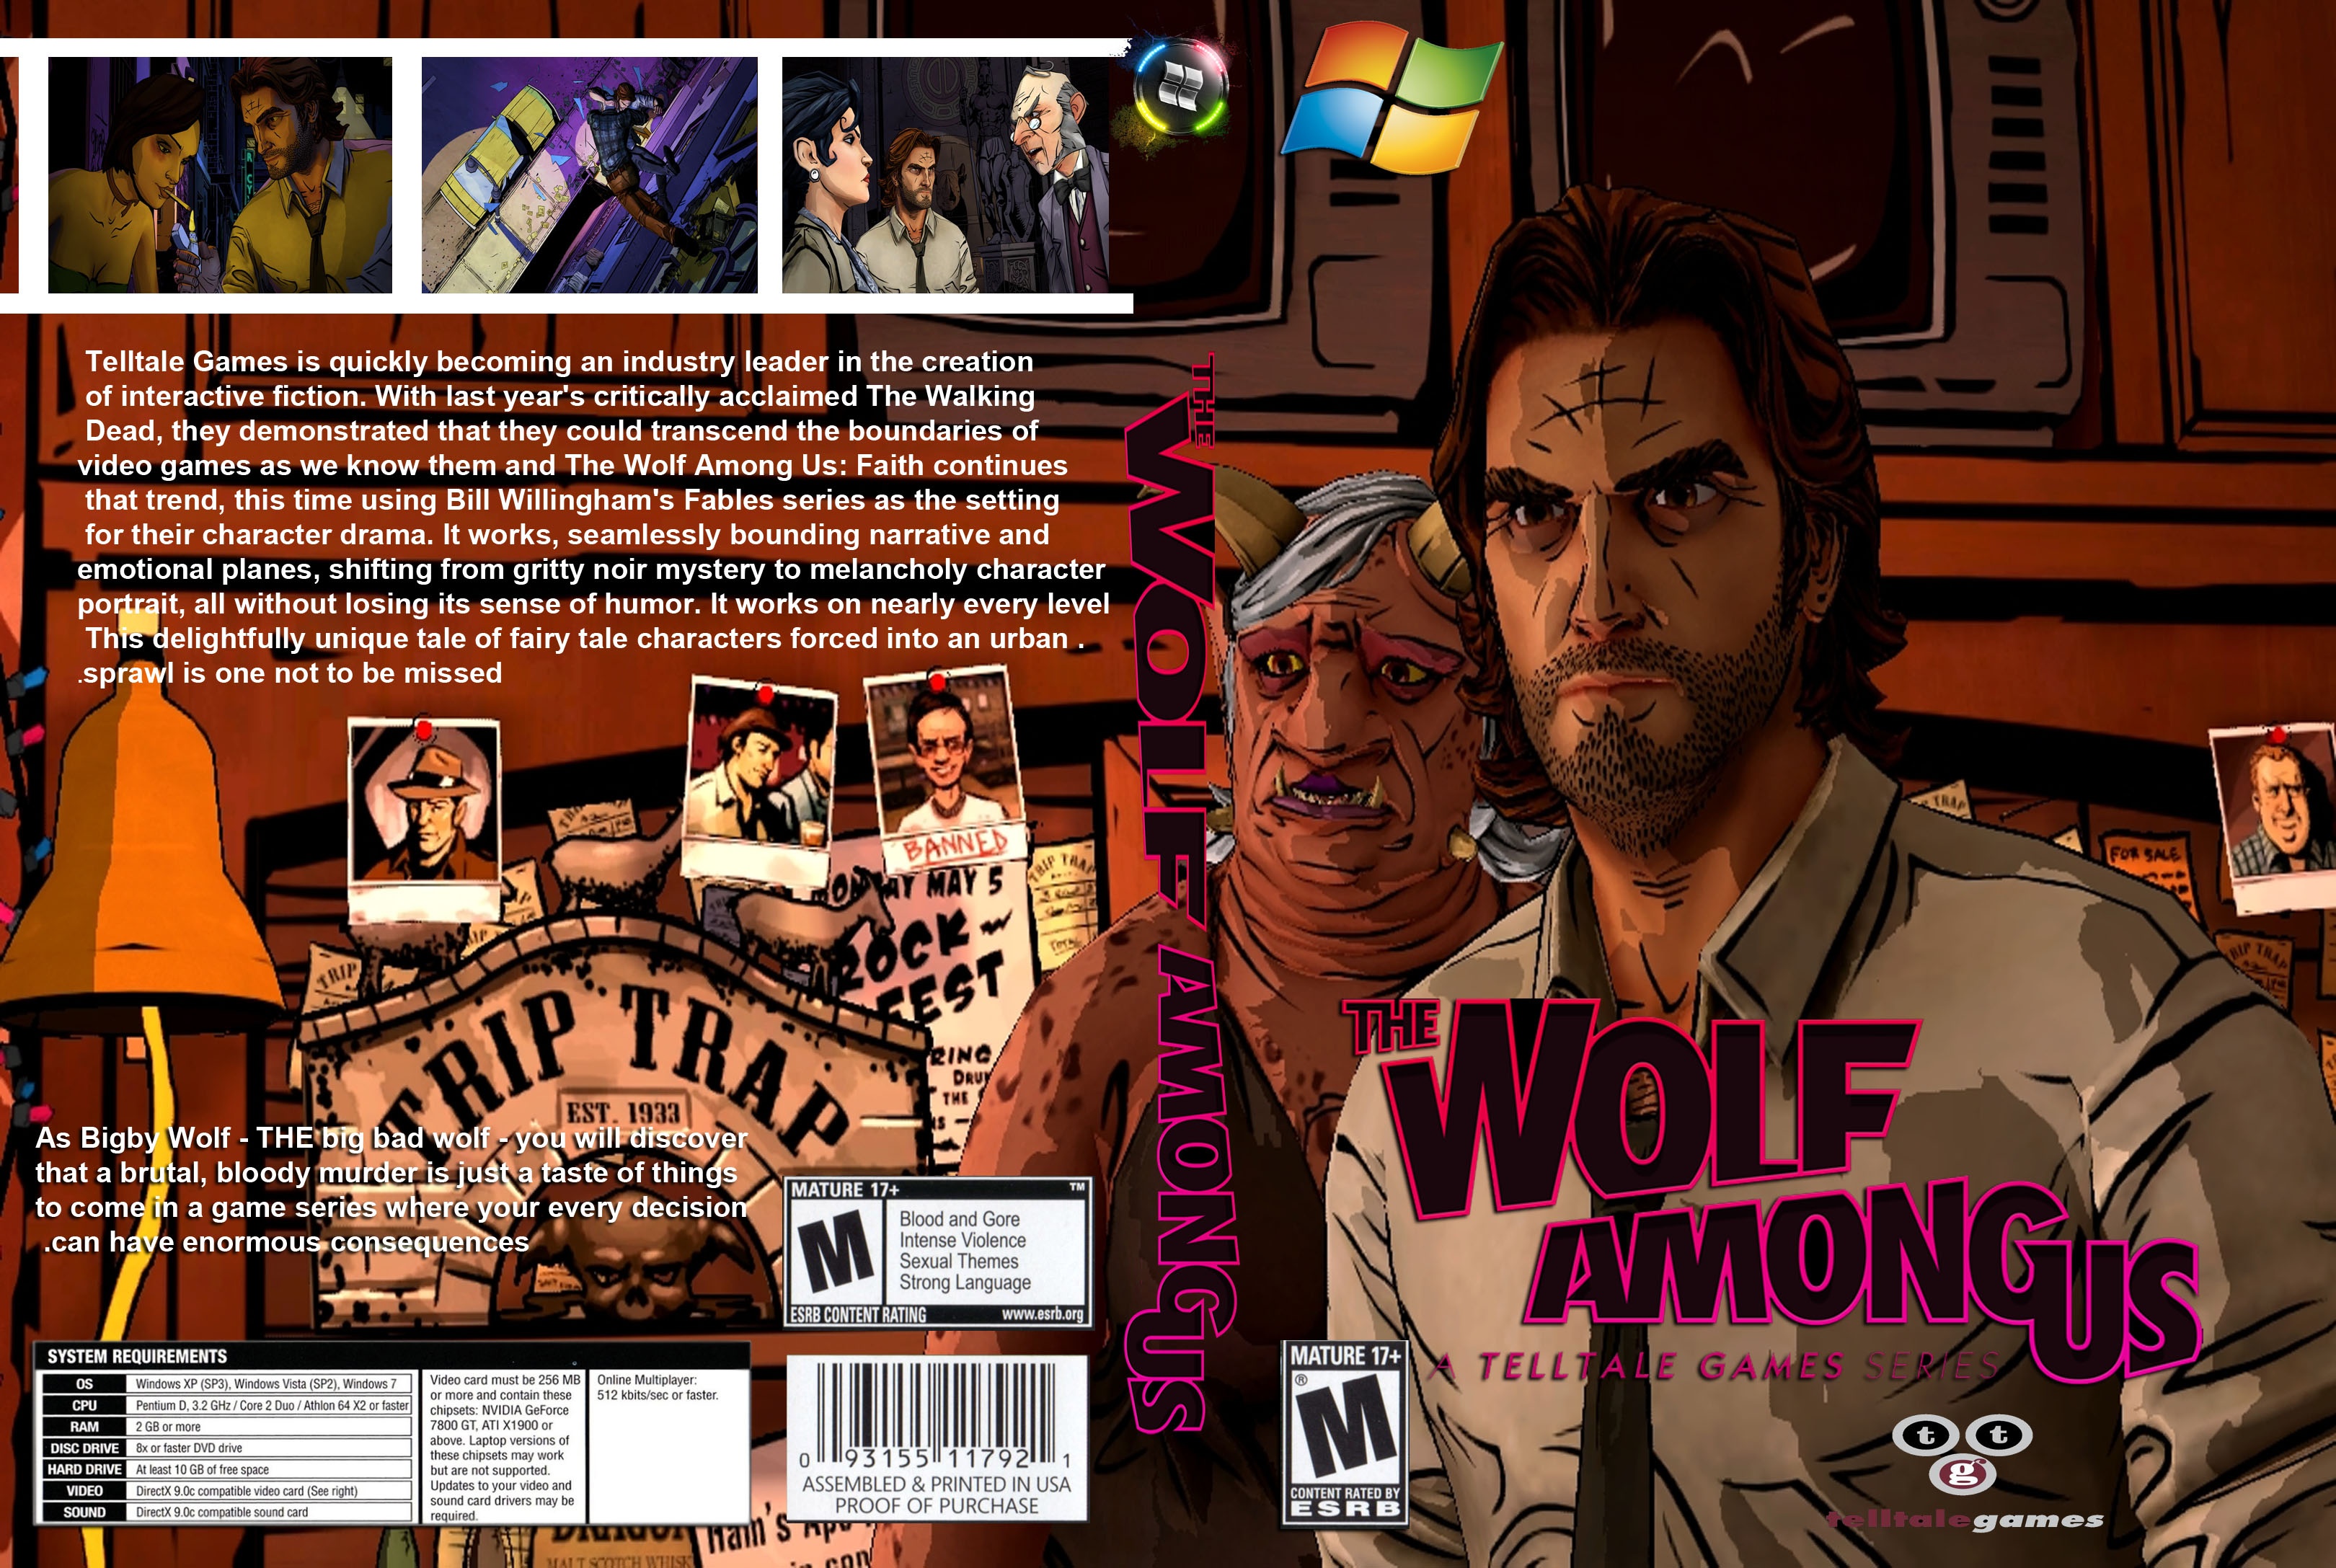 The Wolf Among Us episode 1 box cover